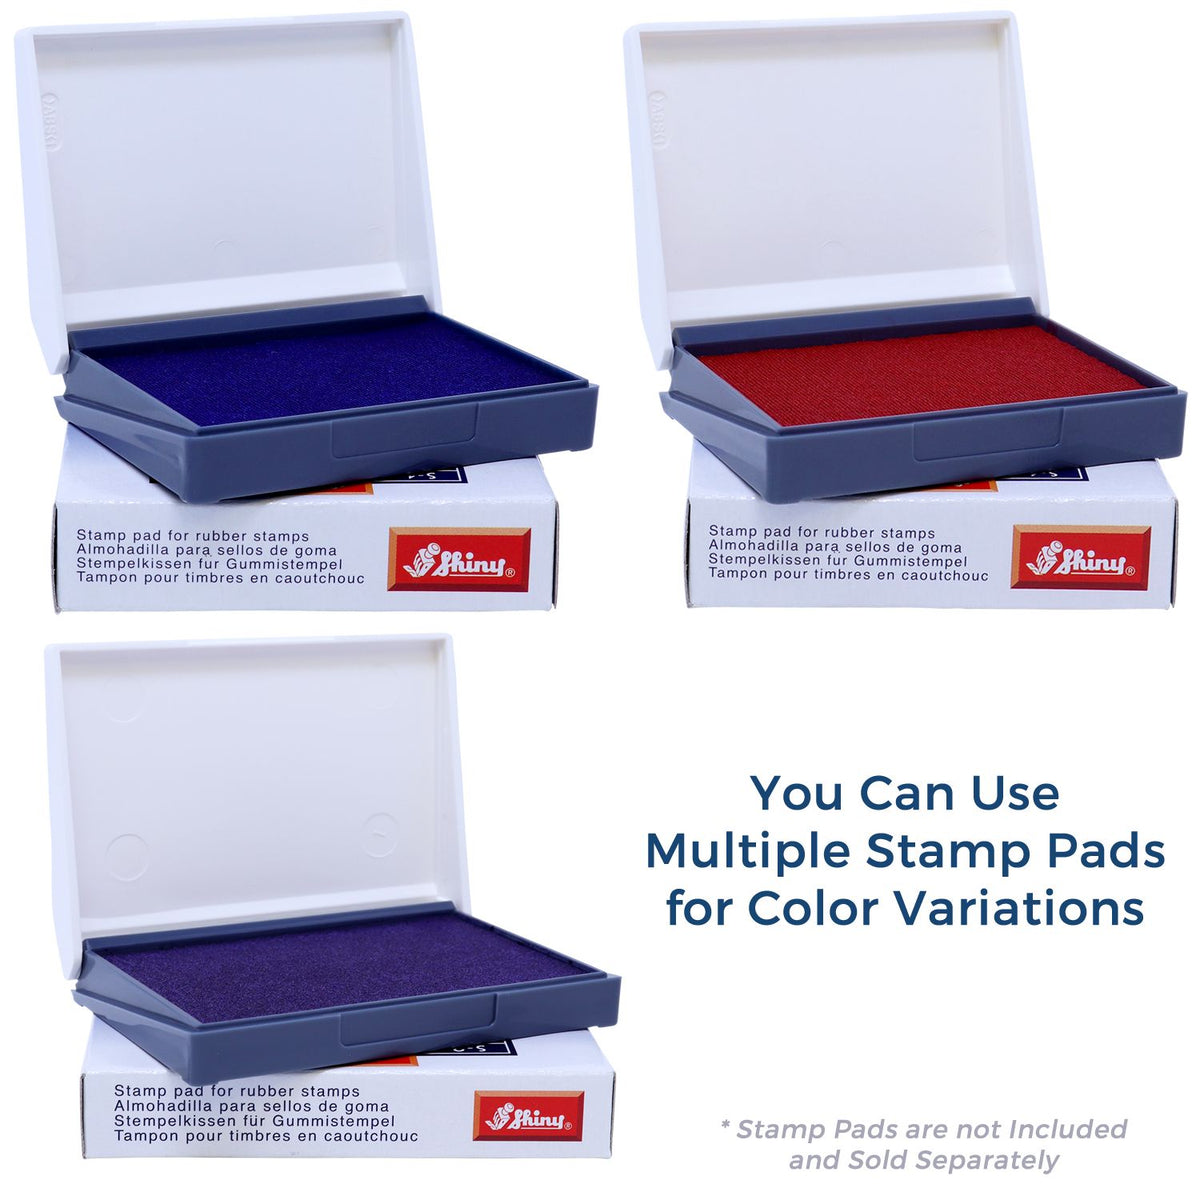 A picture showing the different ink colors or hues available for the Wooden Handle Indiana Rectangular Notary Public Stamp product.